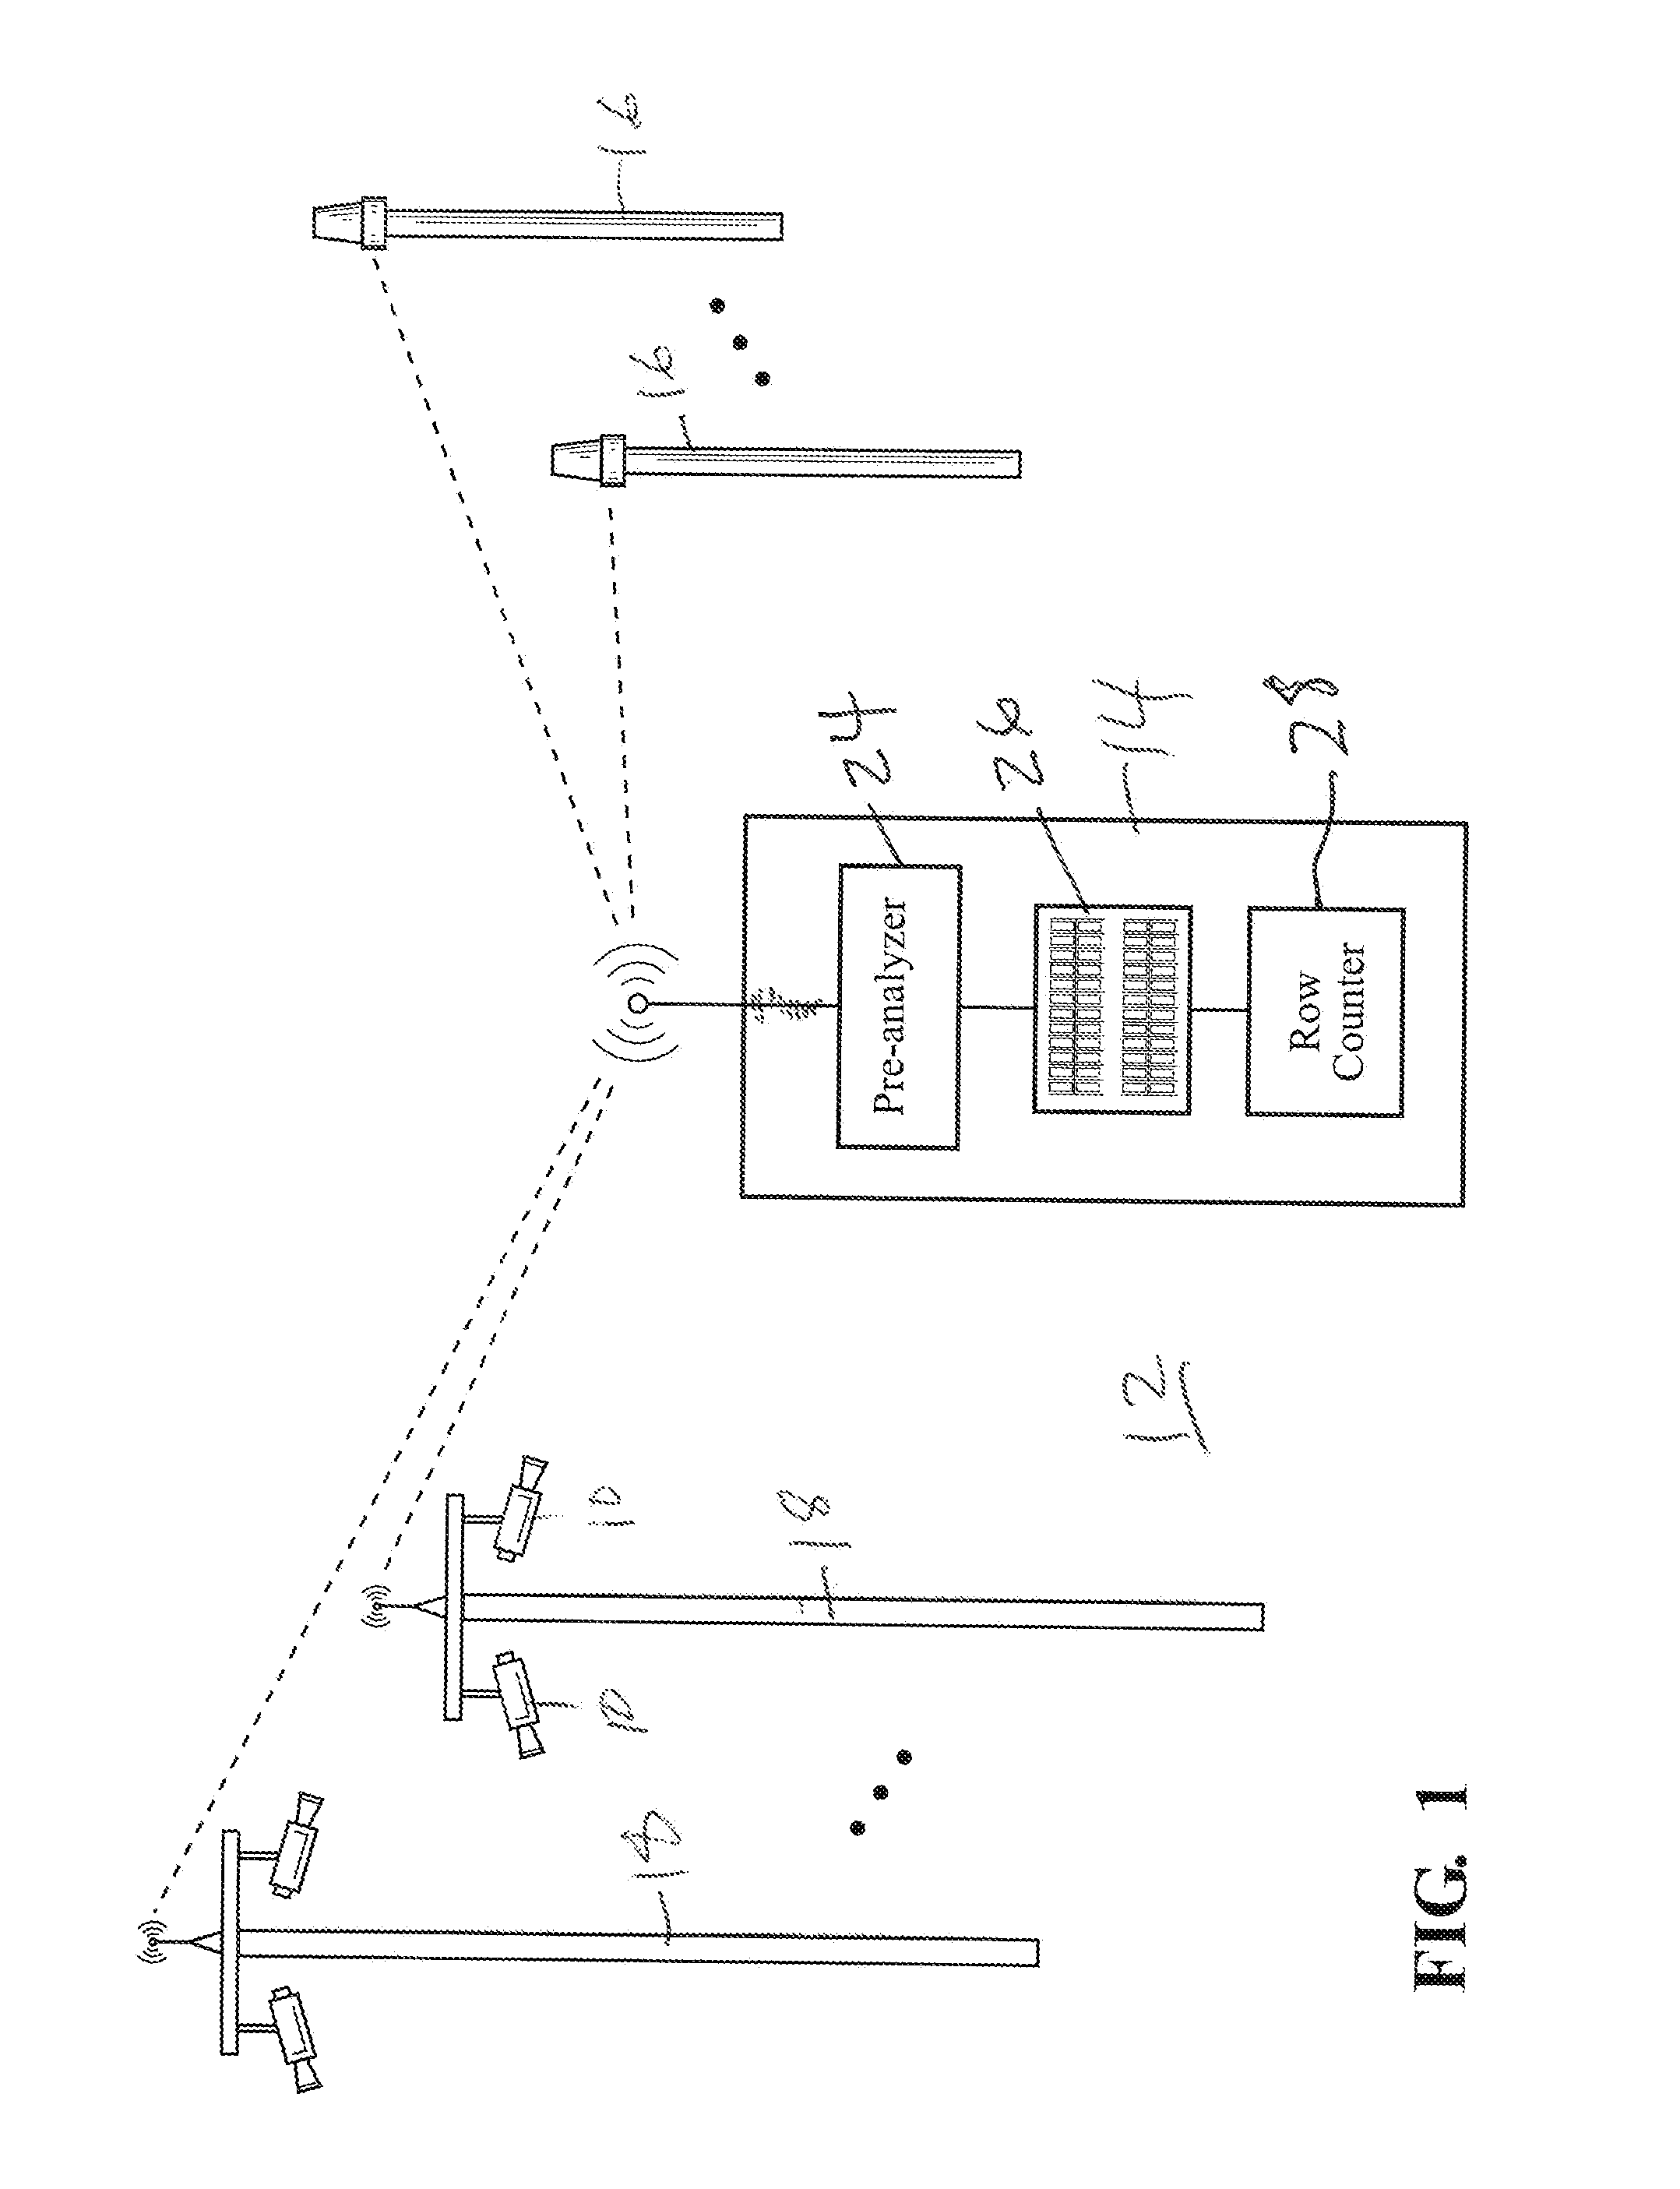 Method and apparatus for locating vacant parking locations in a parking lot or structure